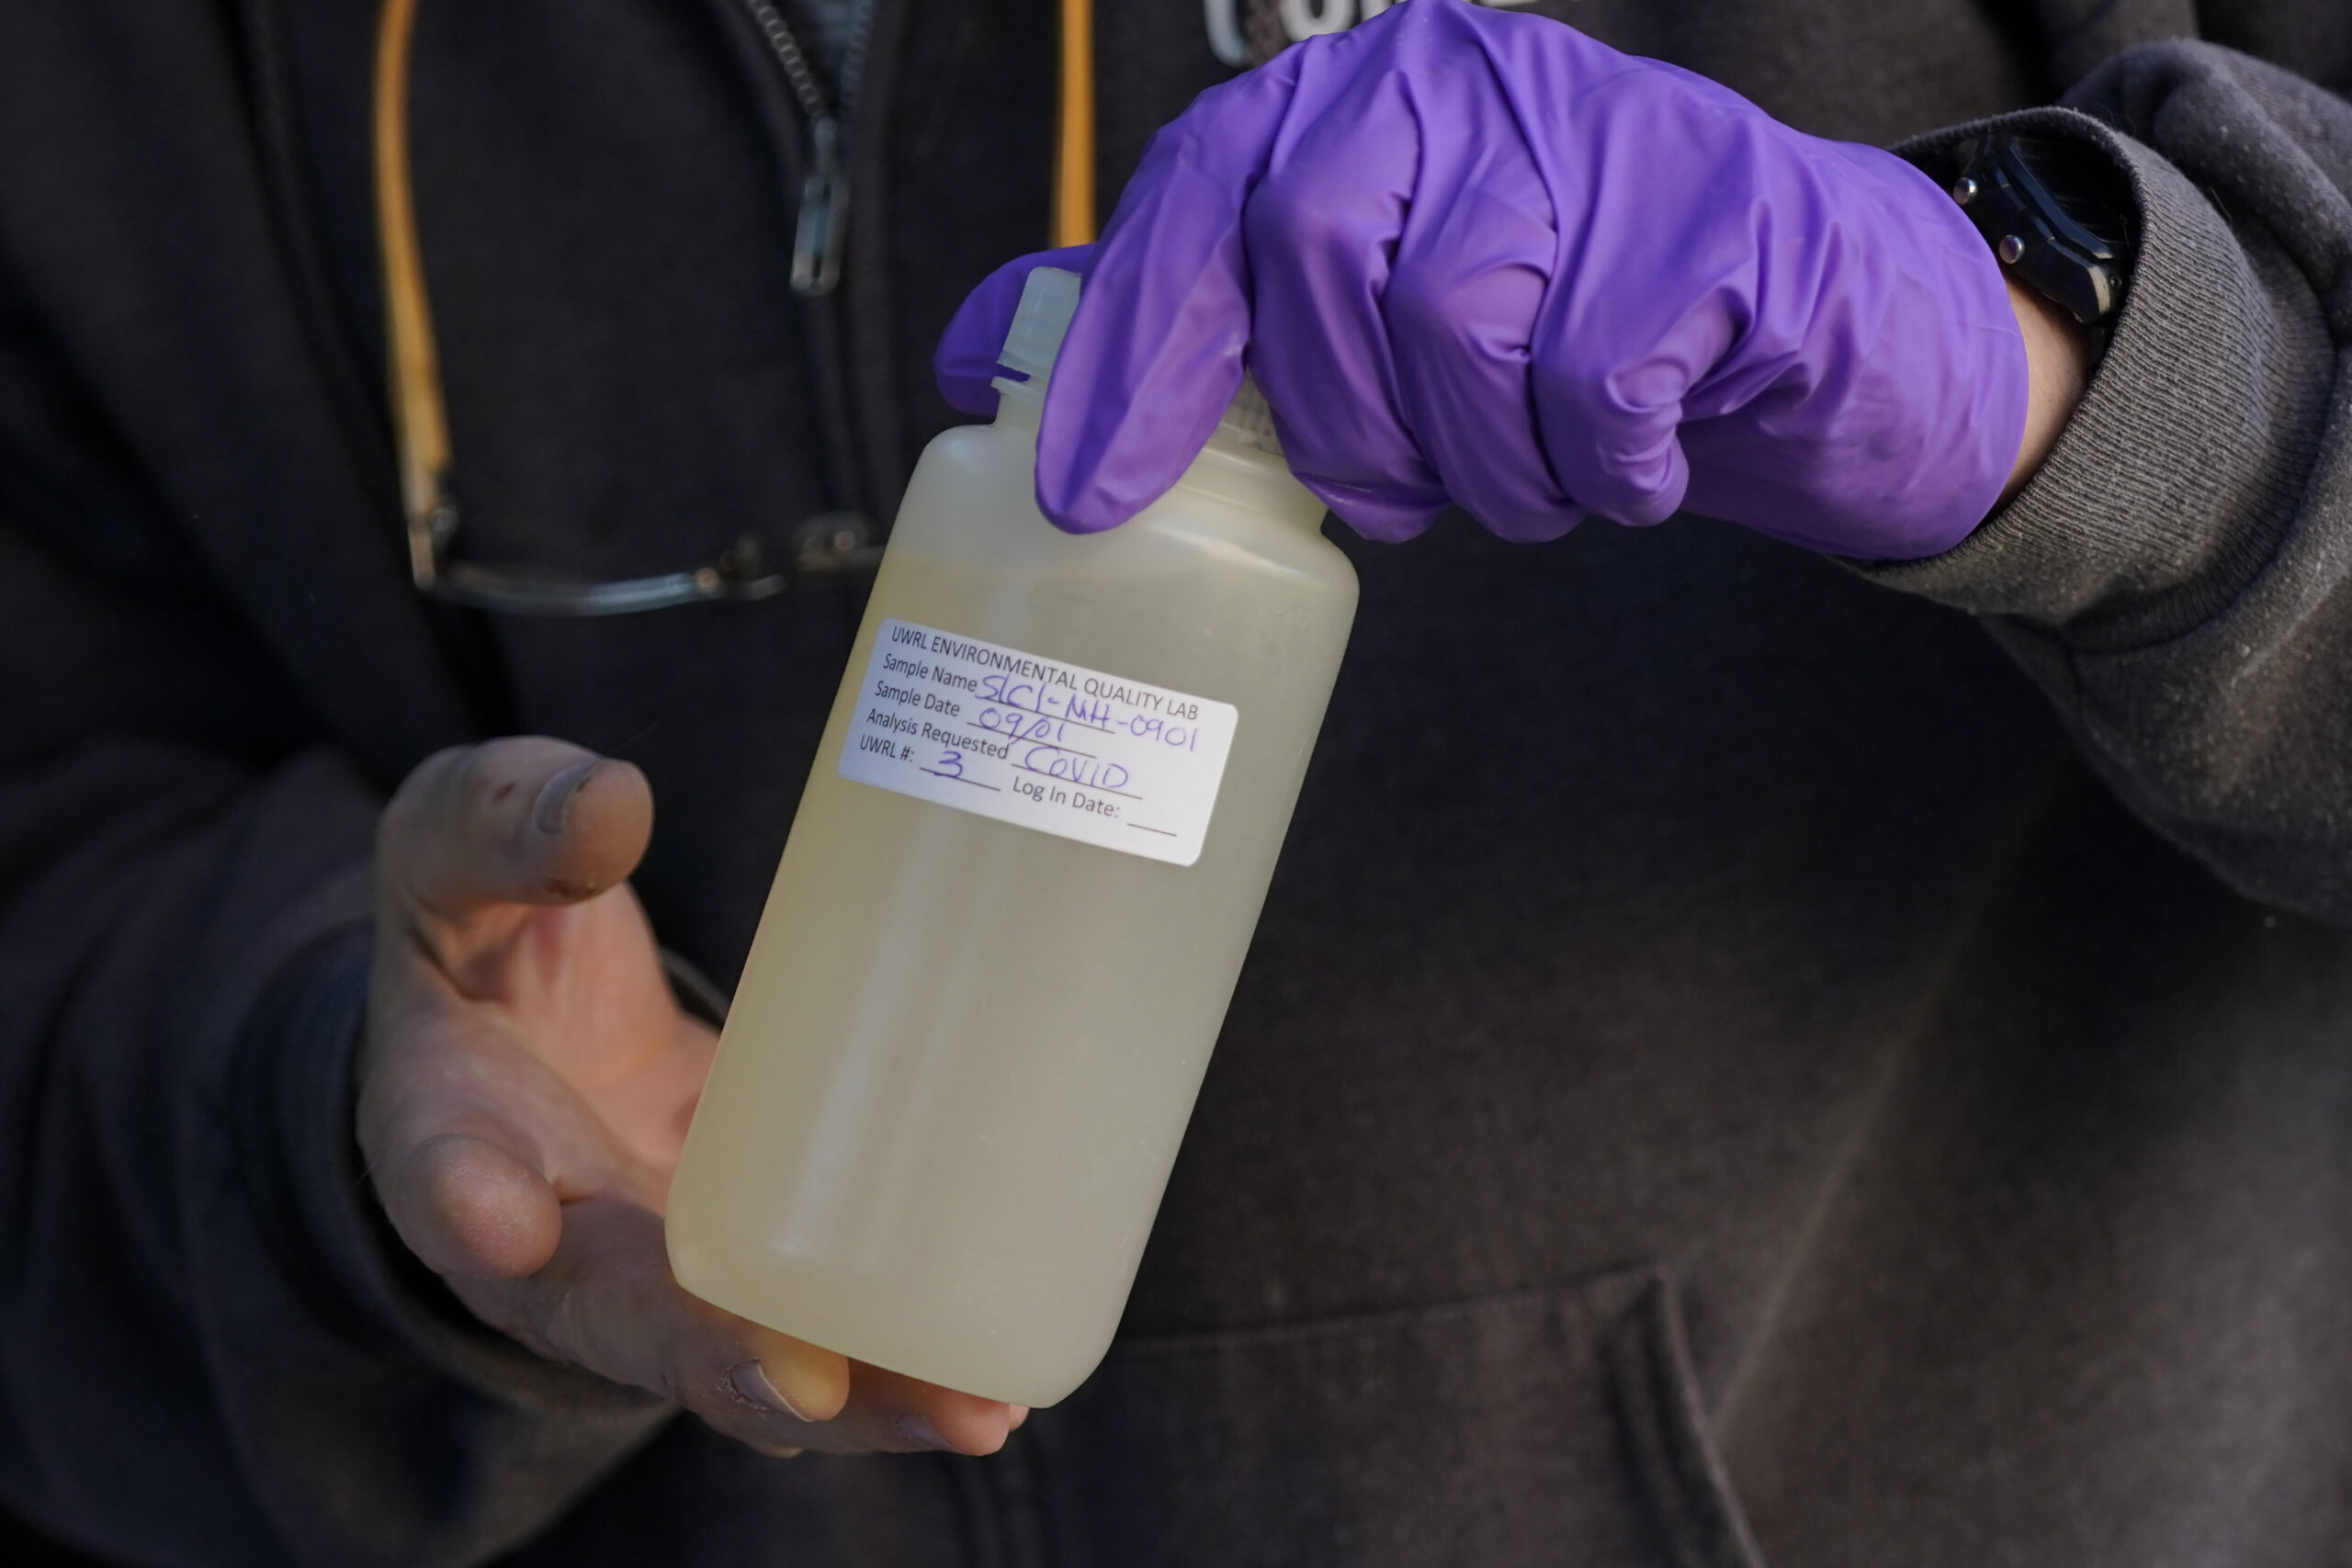 Utah State professor Ryan Dupont collects sewage samples from the dorms